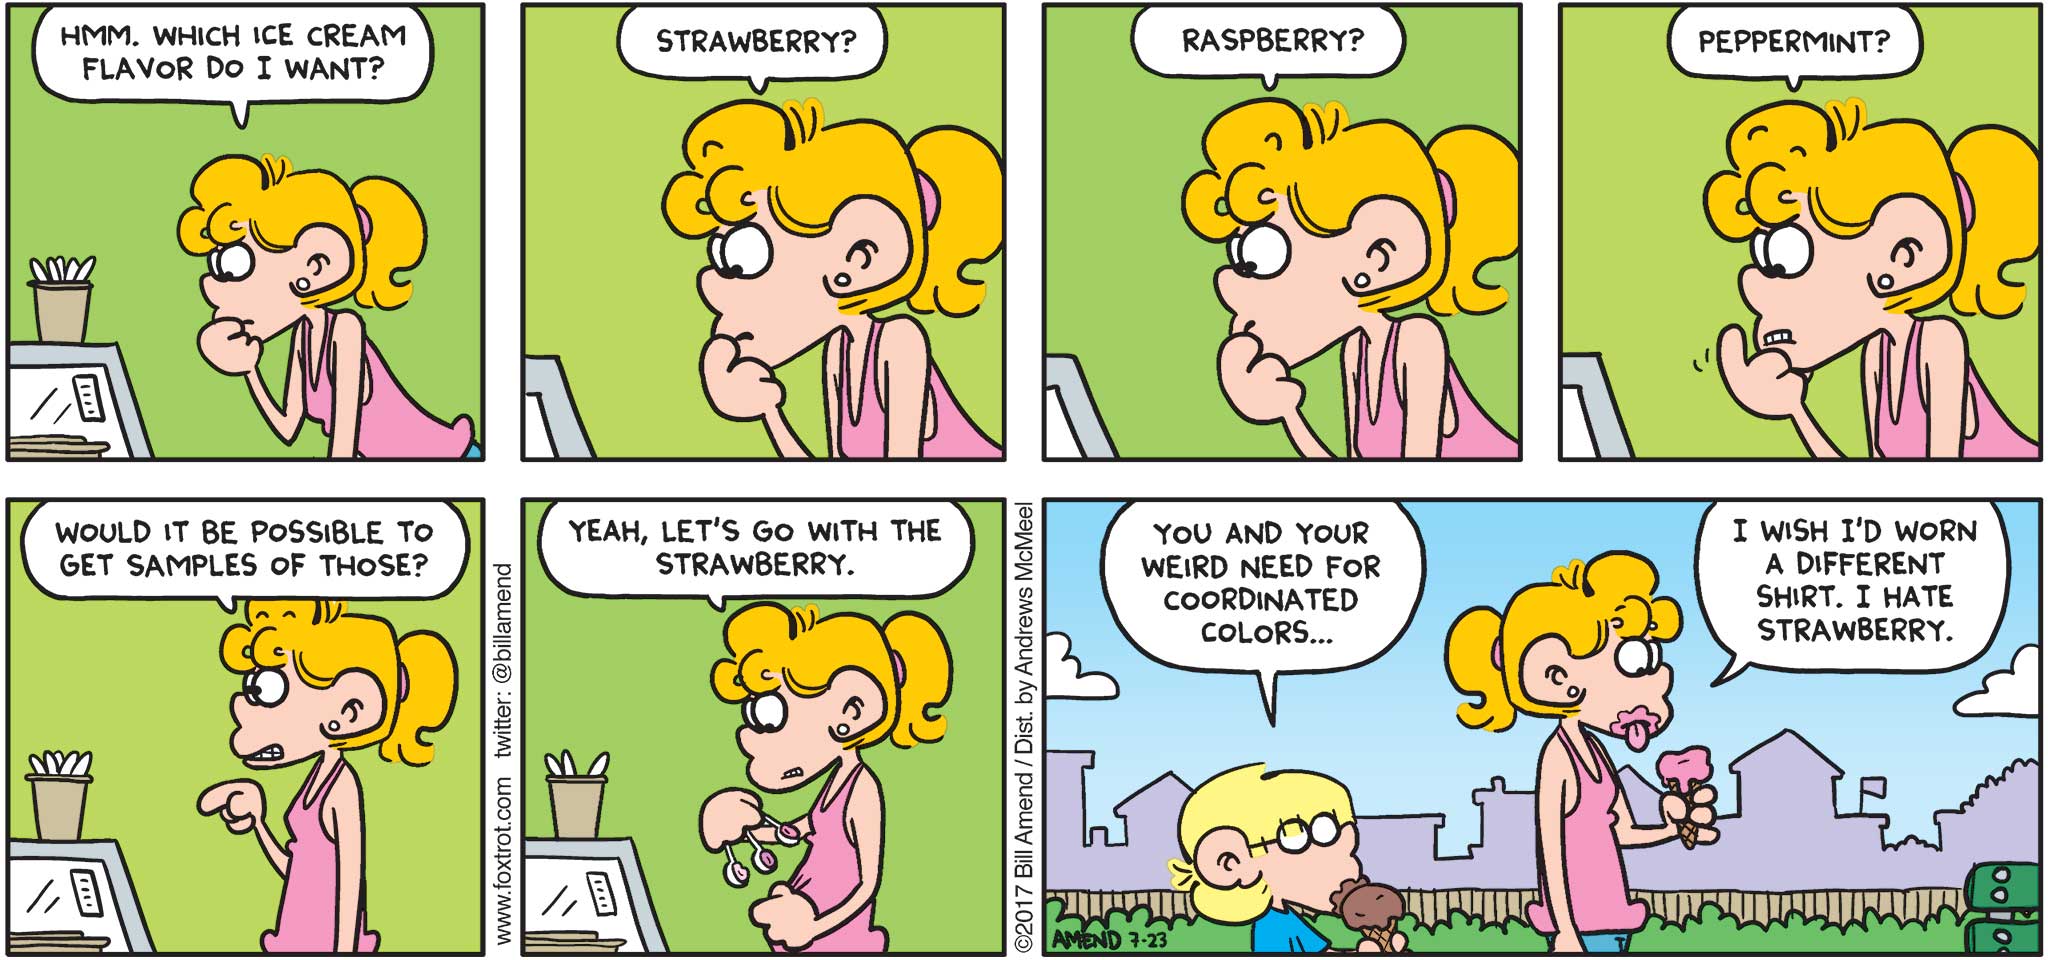 FoxTrot by Bill Amend - "Coordination" published July 23, 2017 - Paige says: Hmm. Which ice cream flavor do I want? Strawberry? Raspberry? Peppermint? Would it be possible to get samples of those? Yeah, let's go with strawberry. Jason says: You and your weird need for coordinated colors... Paige says: I wish I'd worn a different shirt. I hate strawberry.